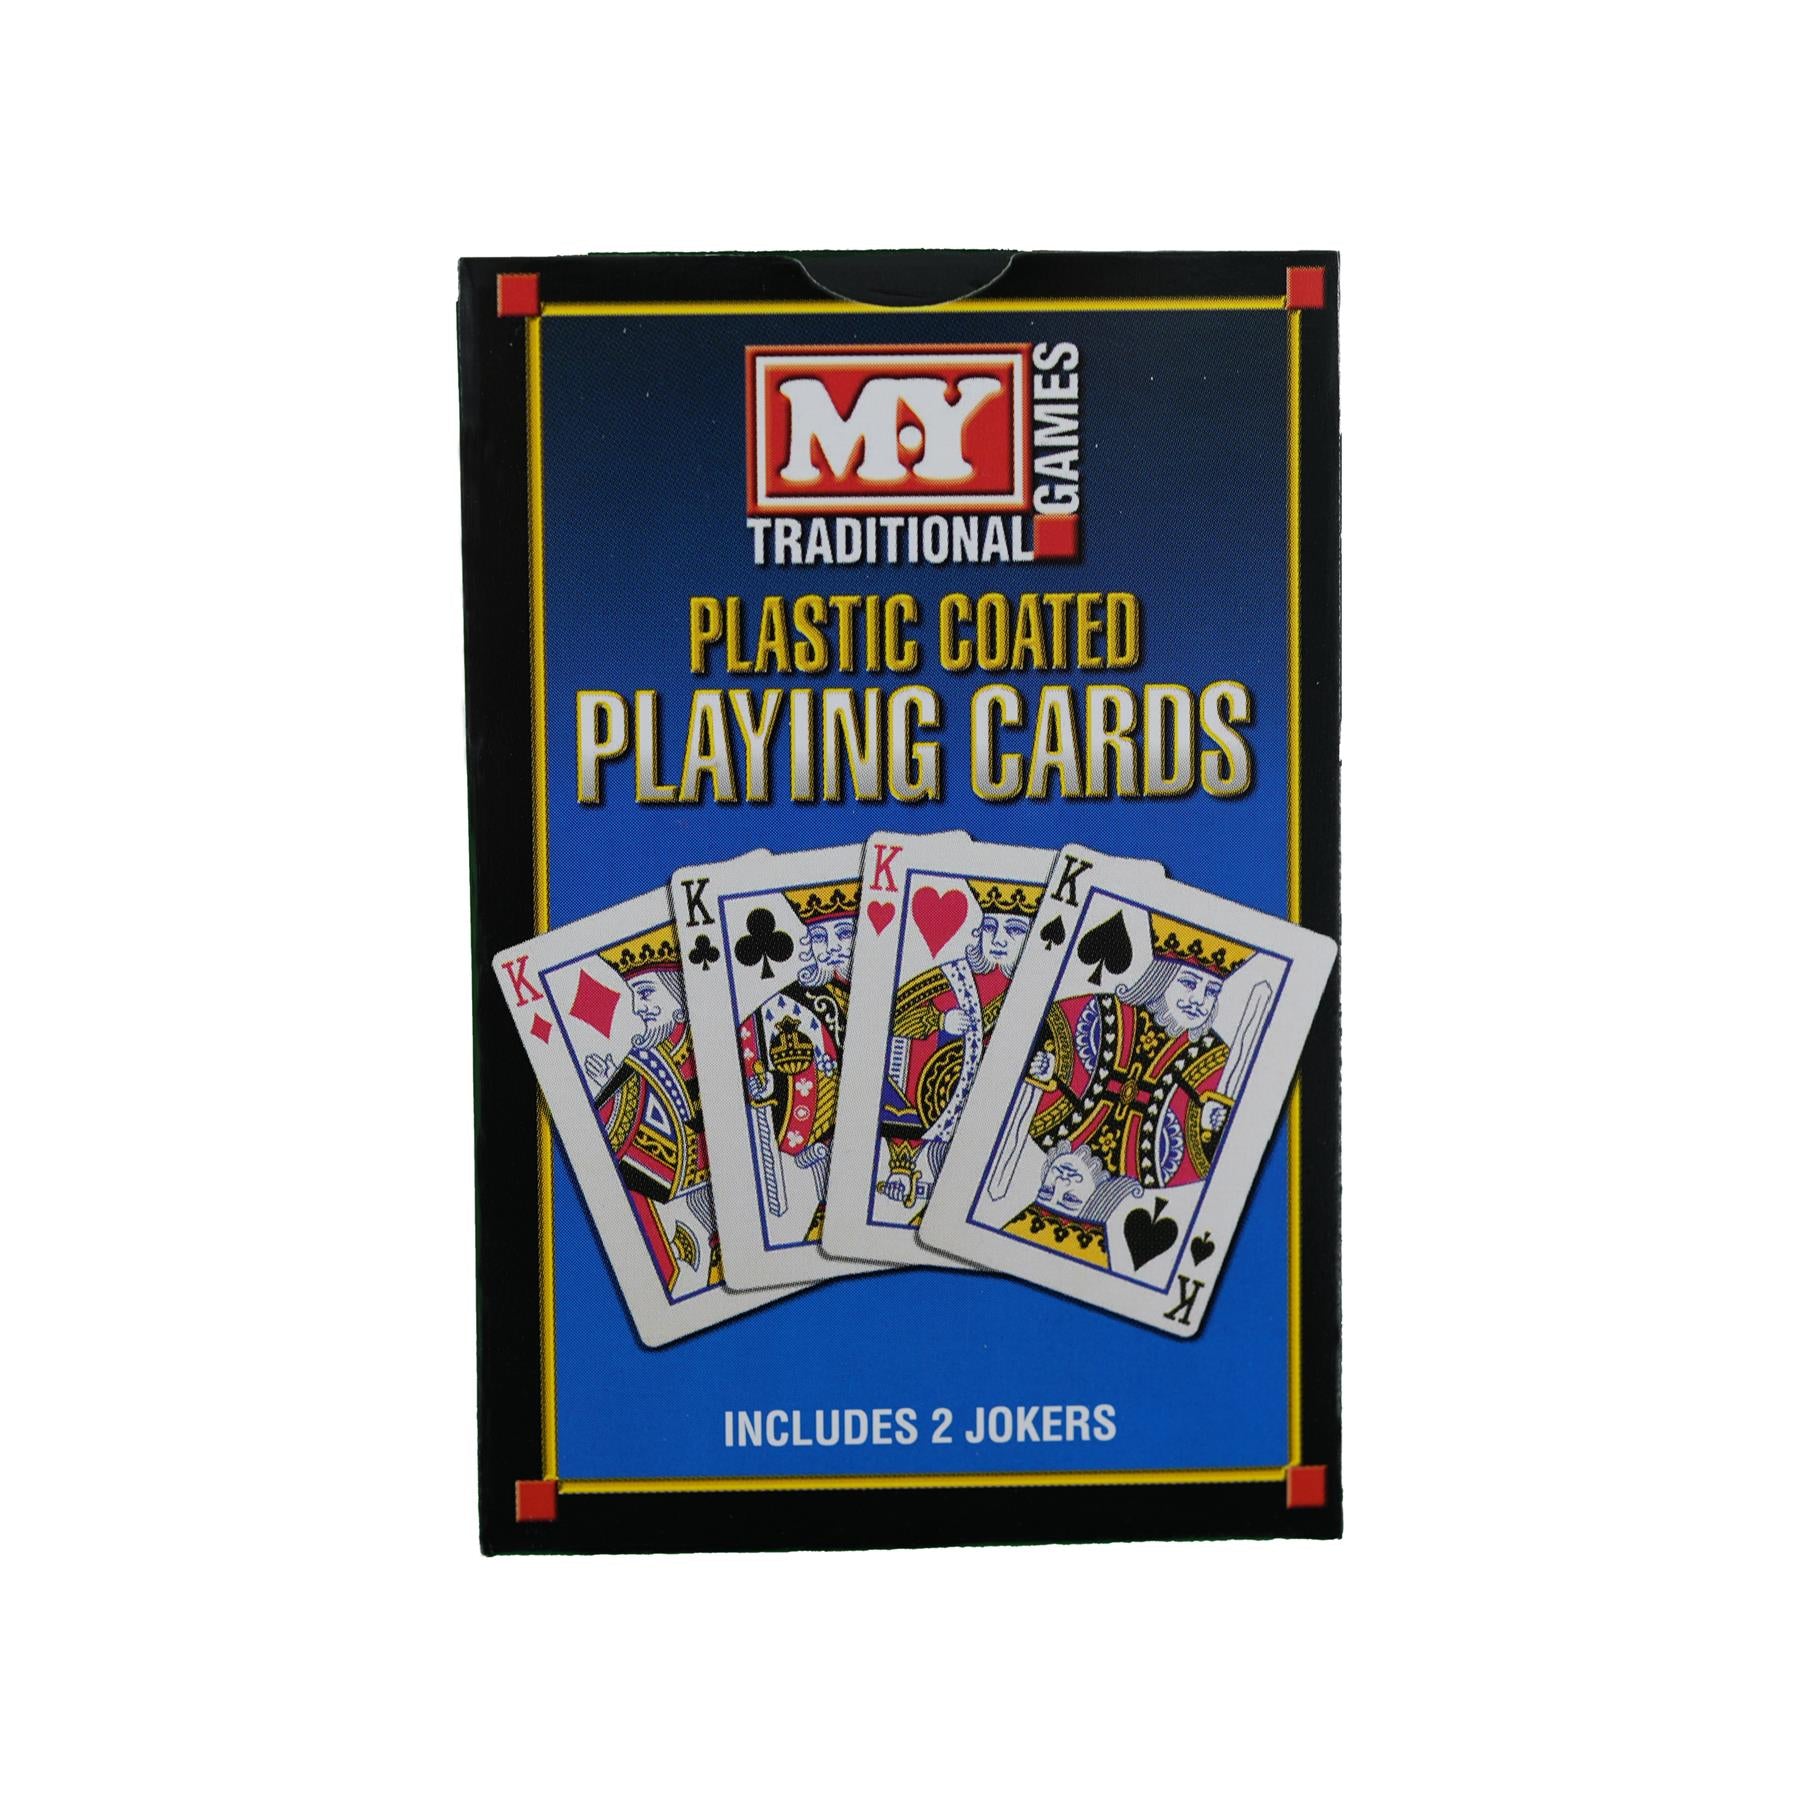 Deck of Classic Playing Cards by The Magic Toy Shop - UKBuyZone